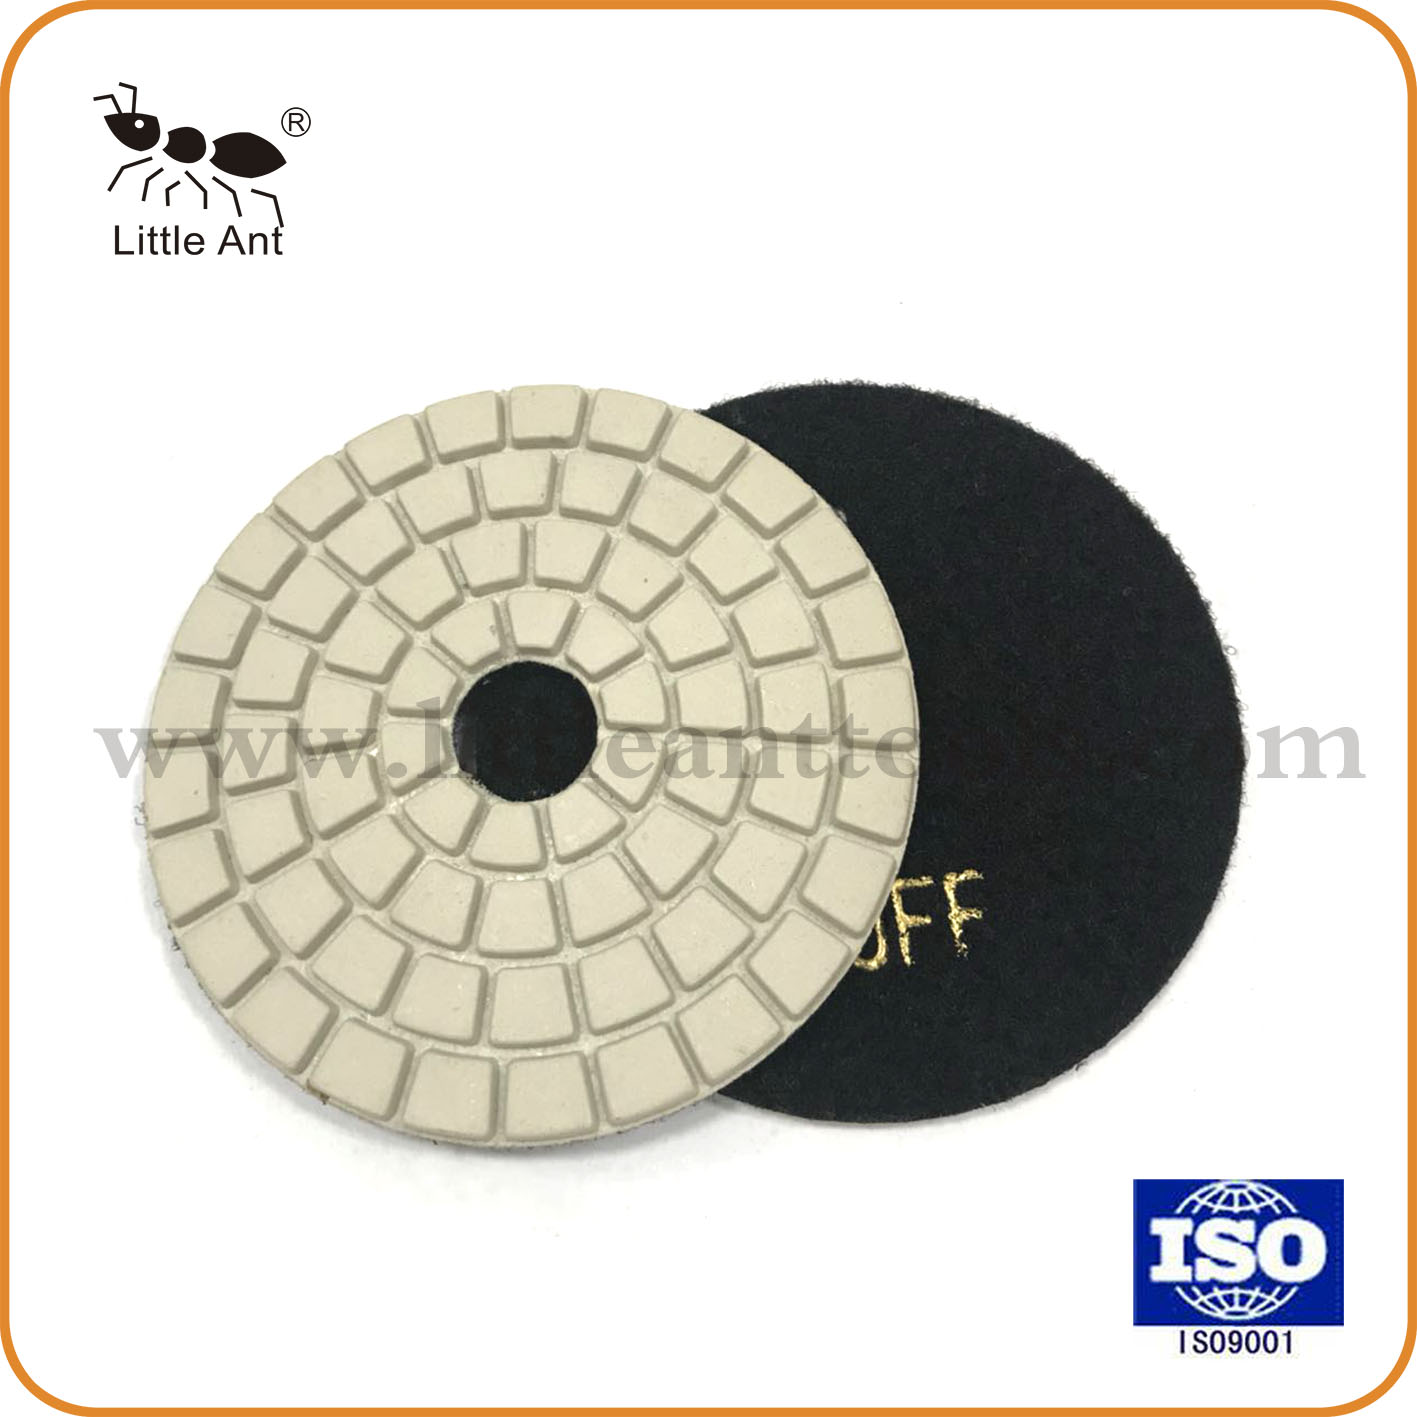 LITTLE ANT Square BUFF Wet Polishing Pads White Or Black for Stone Concrete Air & Electric Polisher 